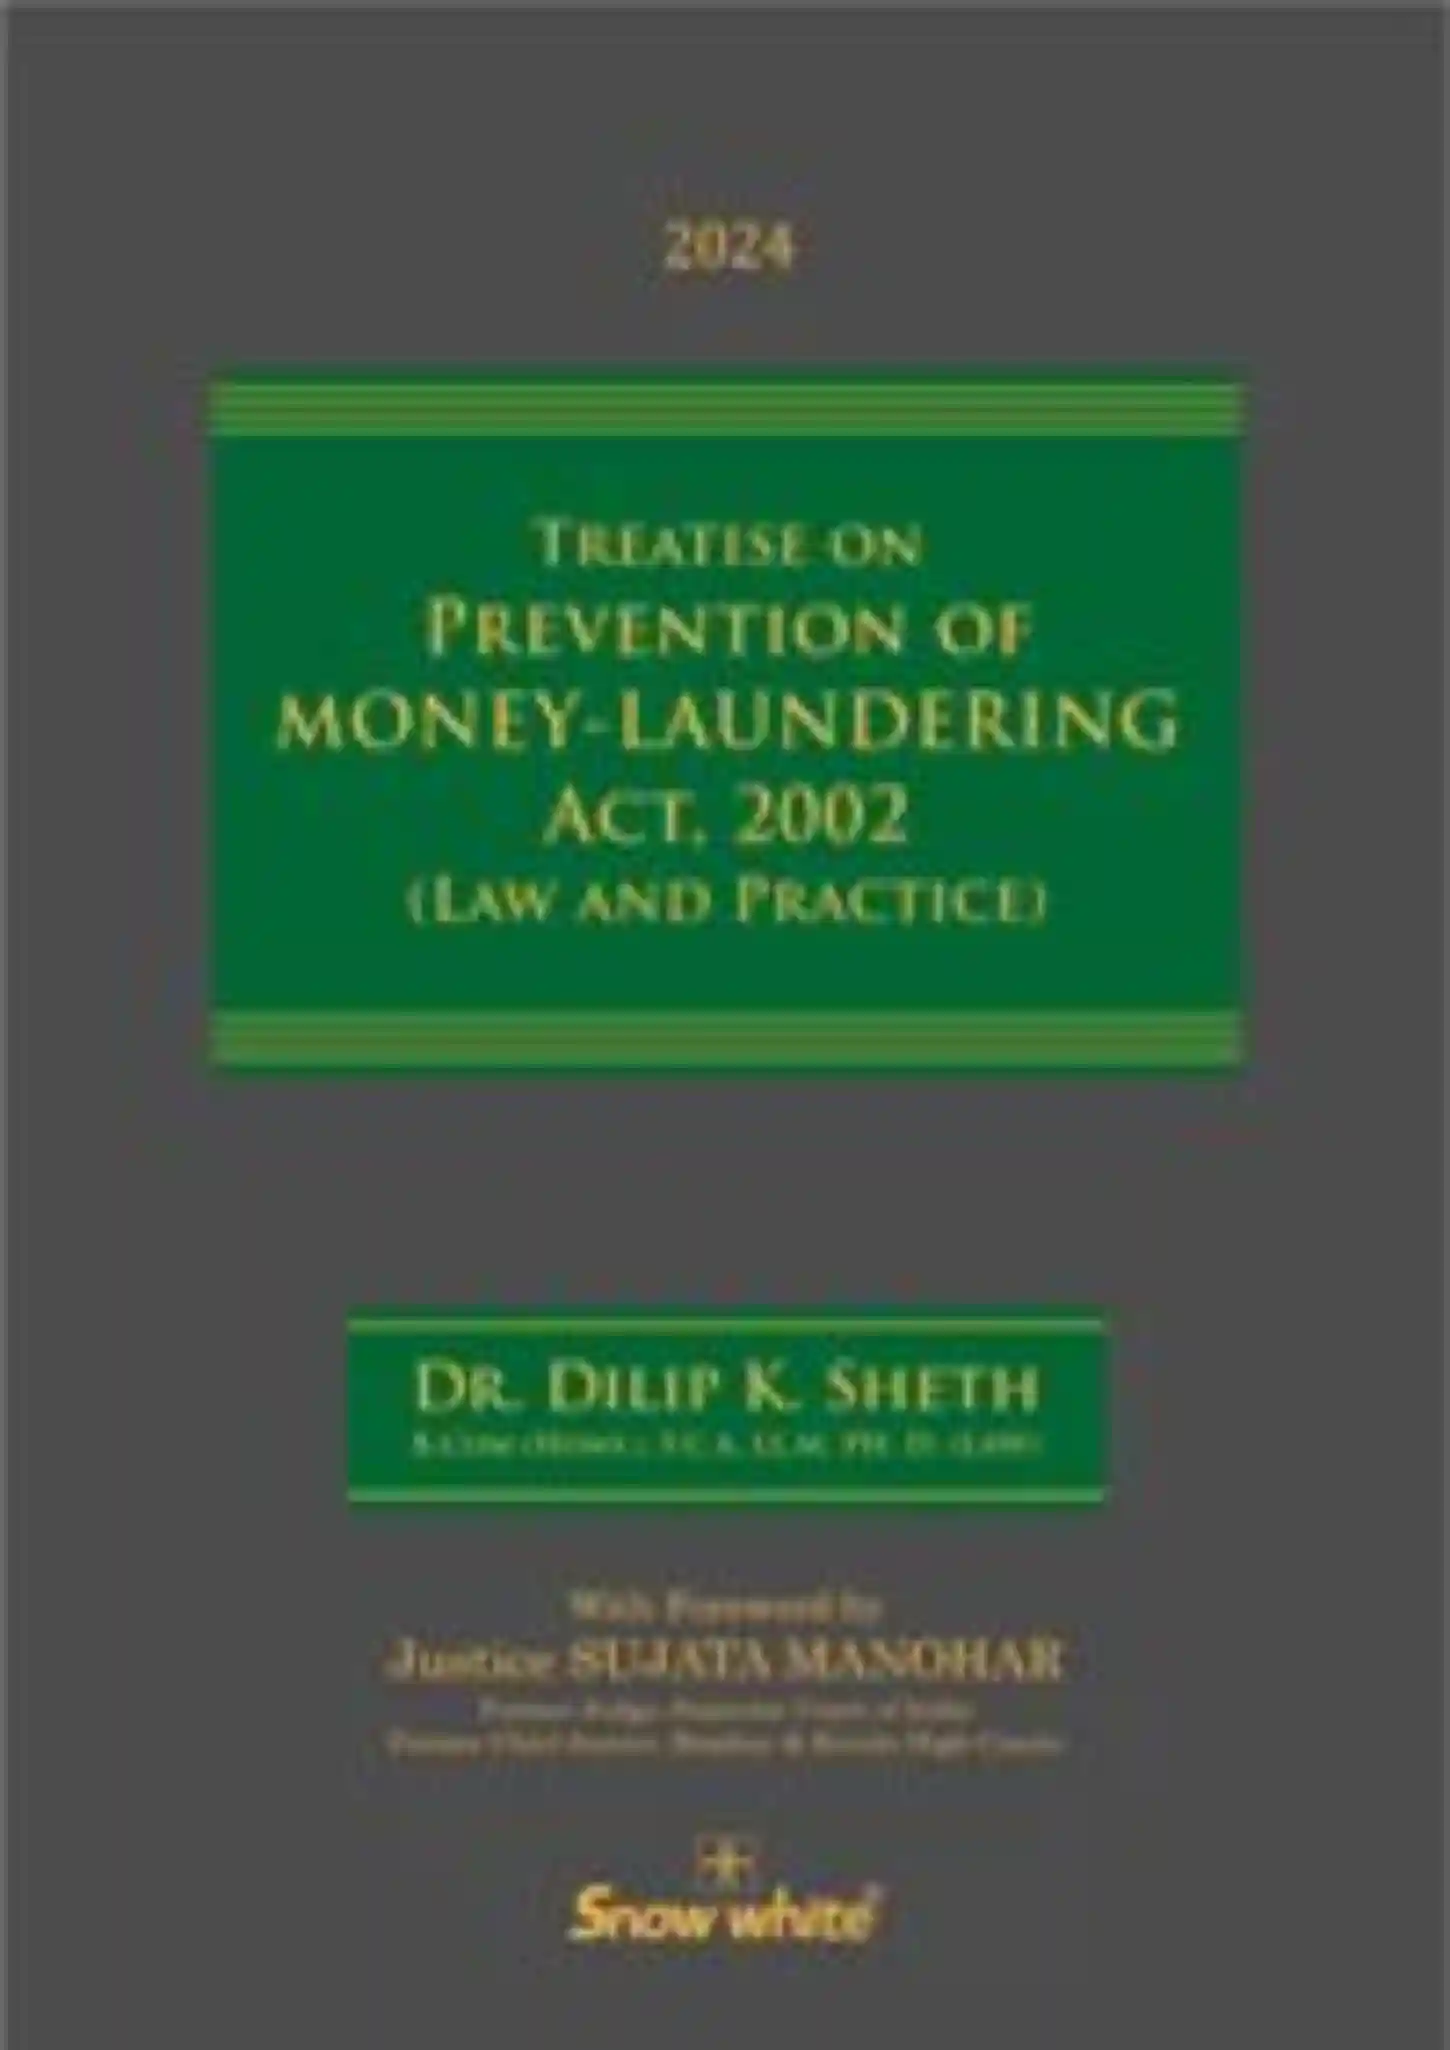 Treatise On Prevention Of Money- Laundering Act, 2002 (Law And Practice)